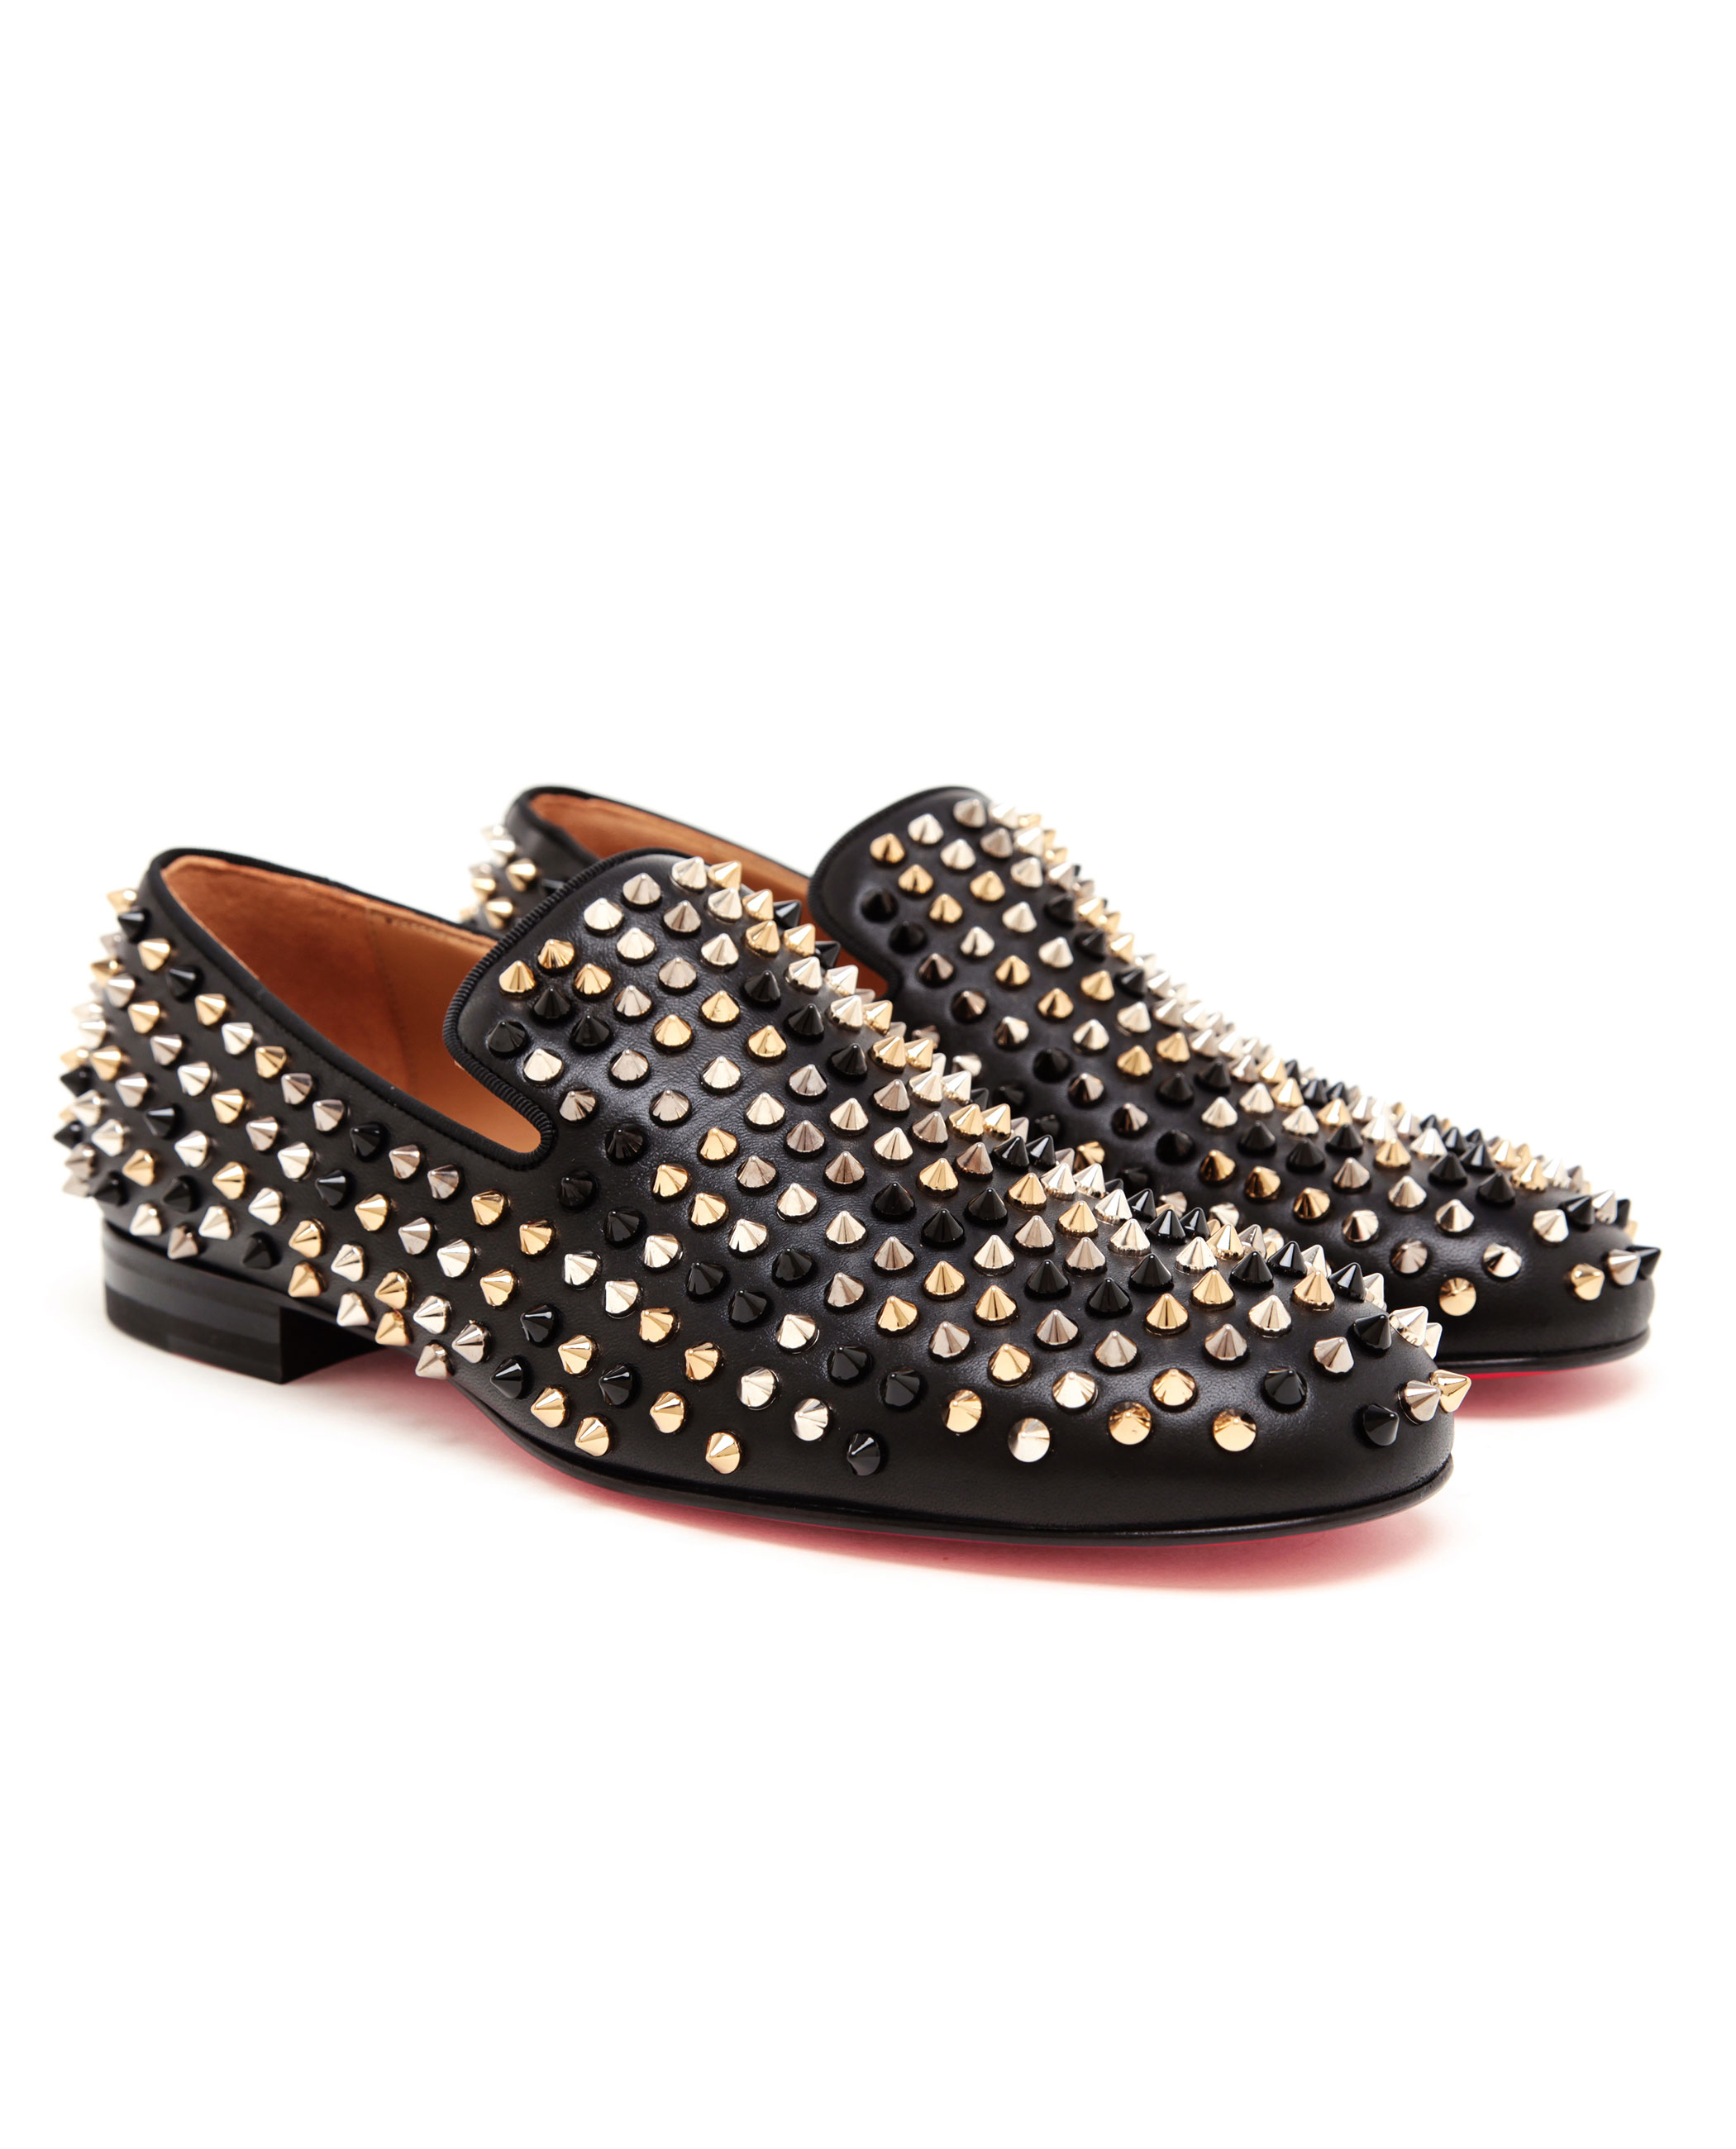 christian louboutin studded round-toe loafers, black spiked louis vuitton shoes